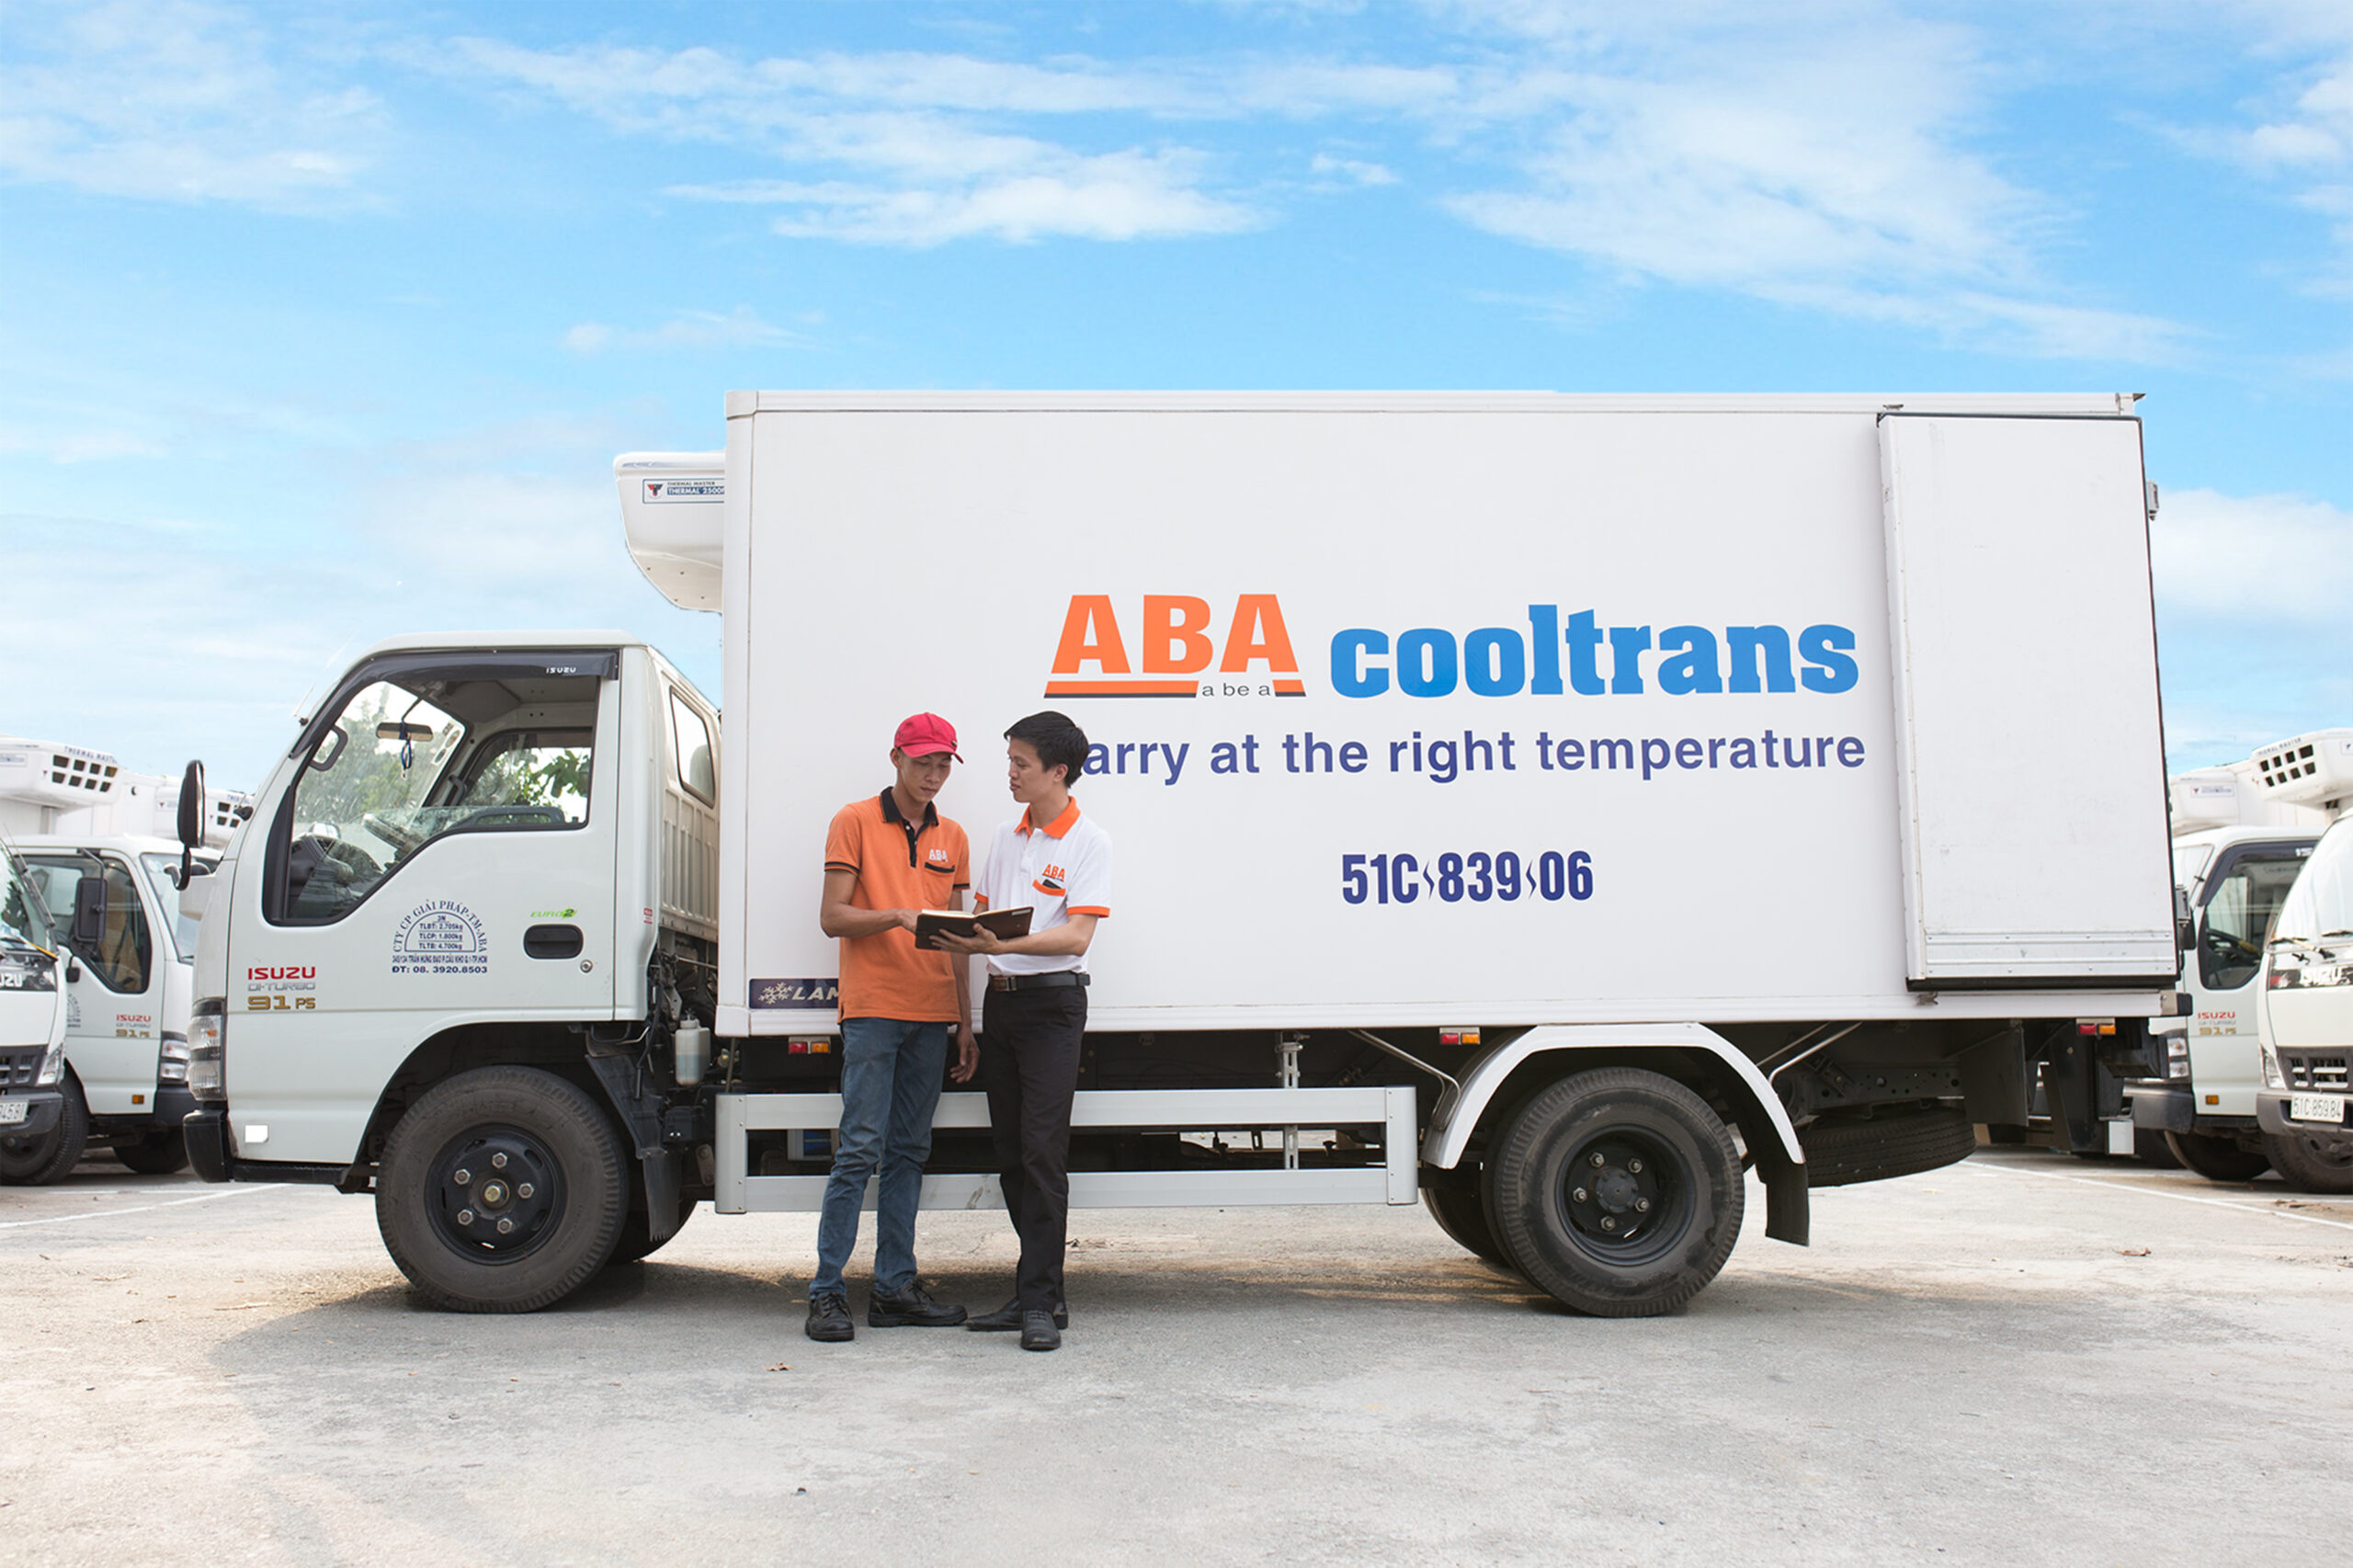 ABA Cooltrans cars